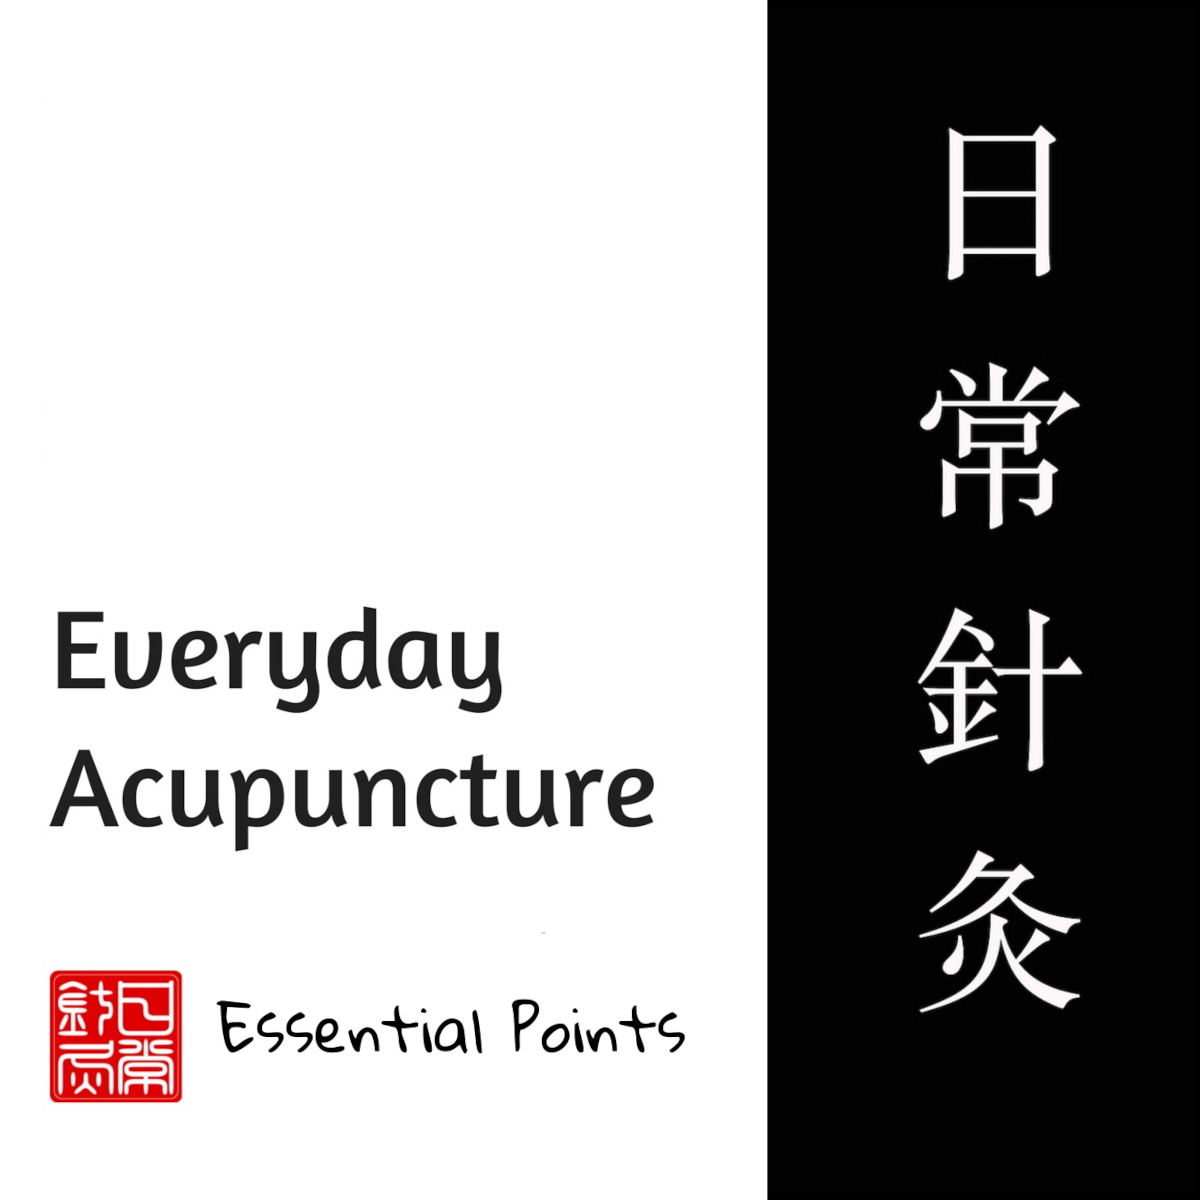 EAP-091 What To Expect On Your First Acupuncture Appointment, with Stacey Whitcomb LAc.